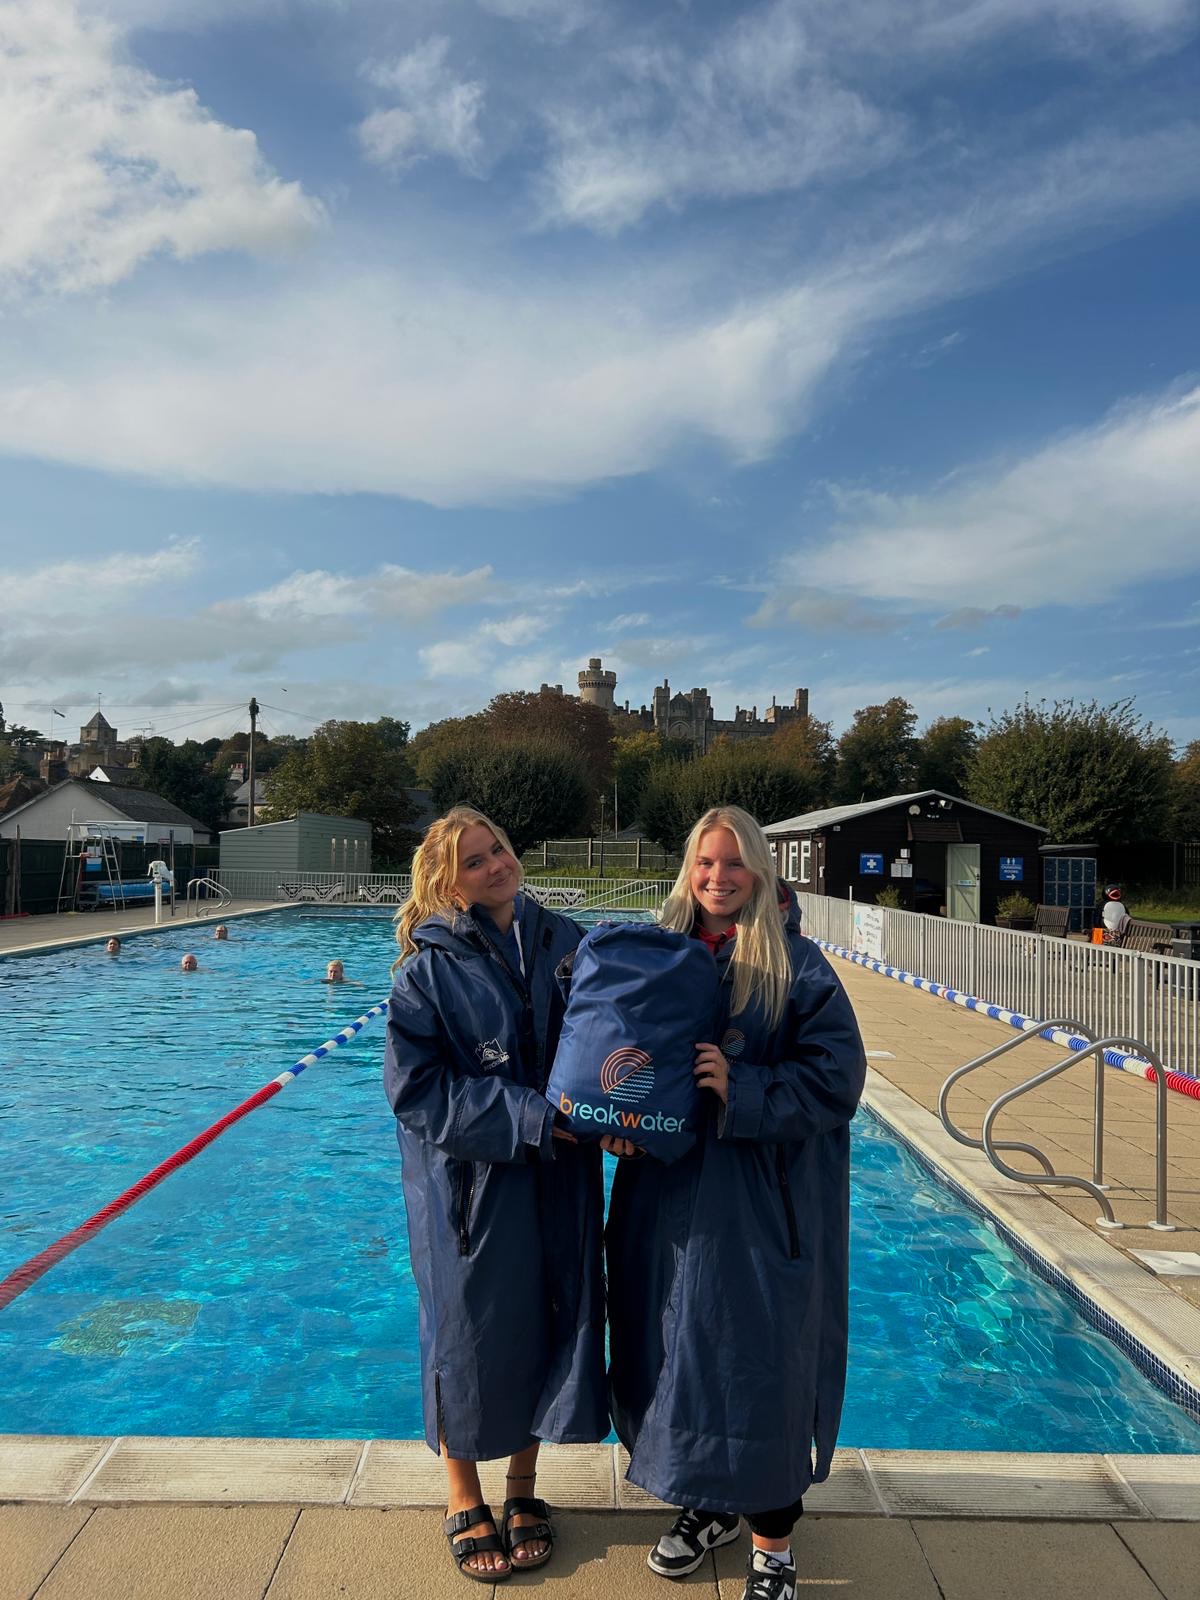 Two women standing by the side of Arundel Lido's outdoor swimming pool. Between them is a blue bag with 'breakwater' written on it.